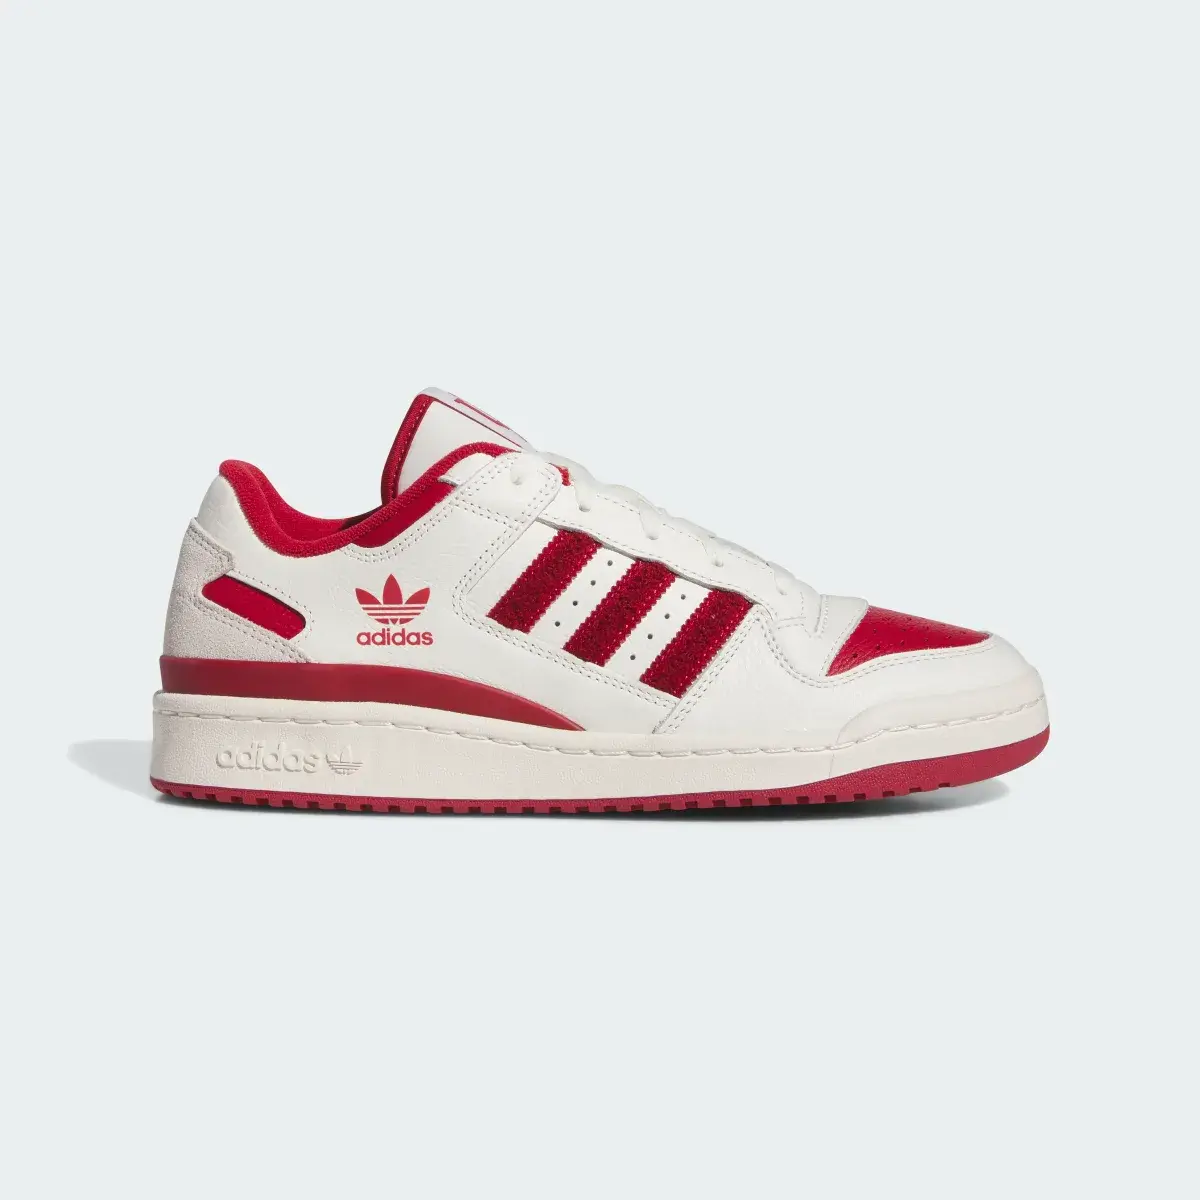 Adidas Indiana Forum Low Shoes. 2